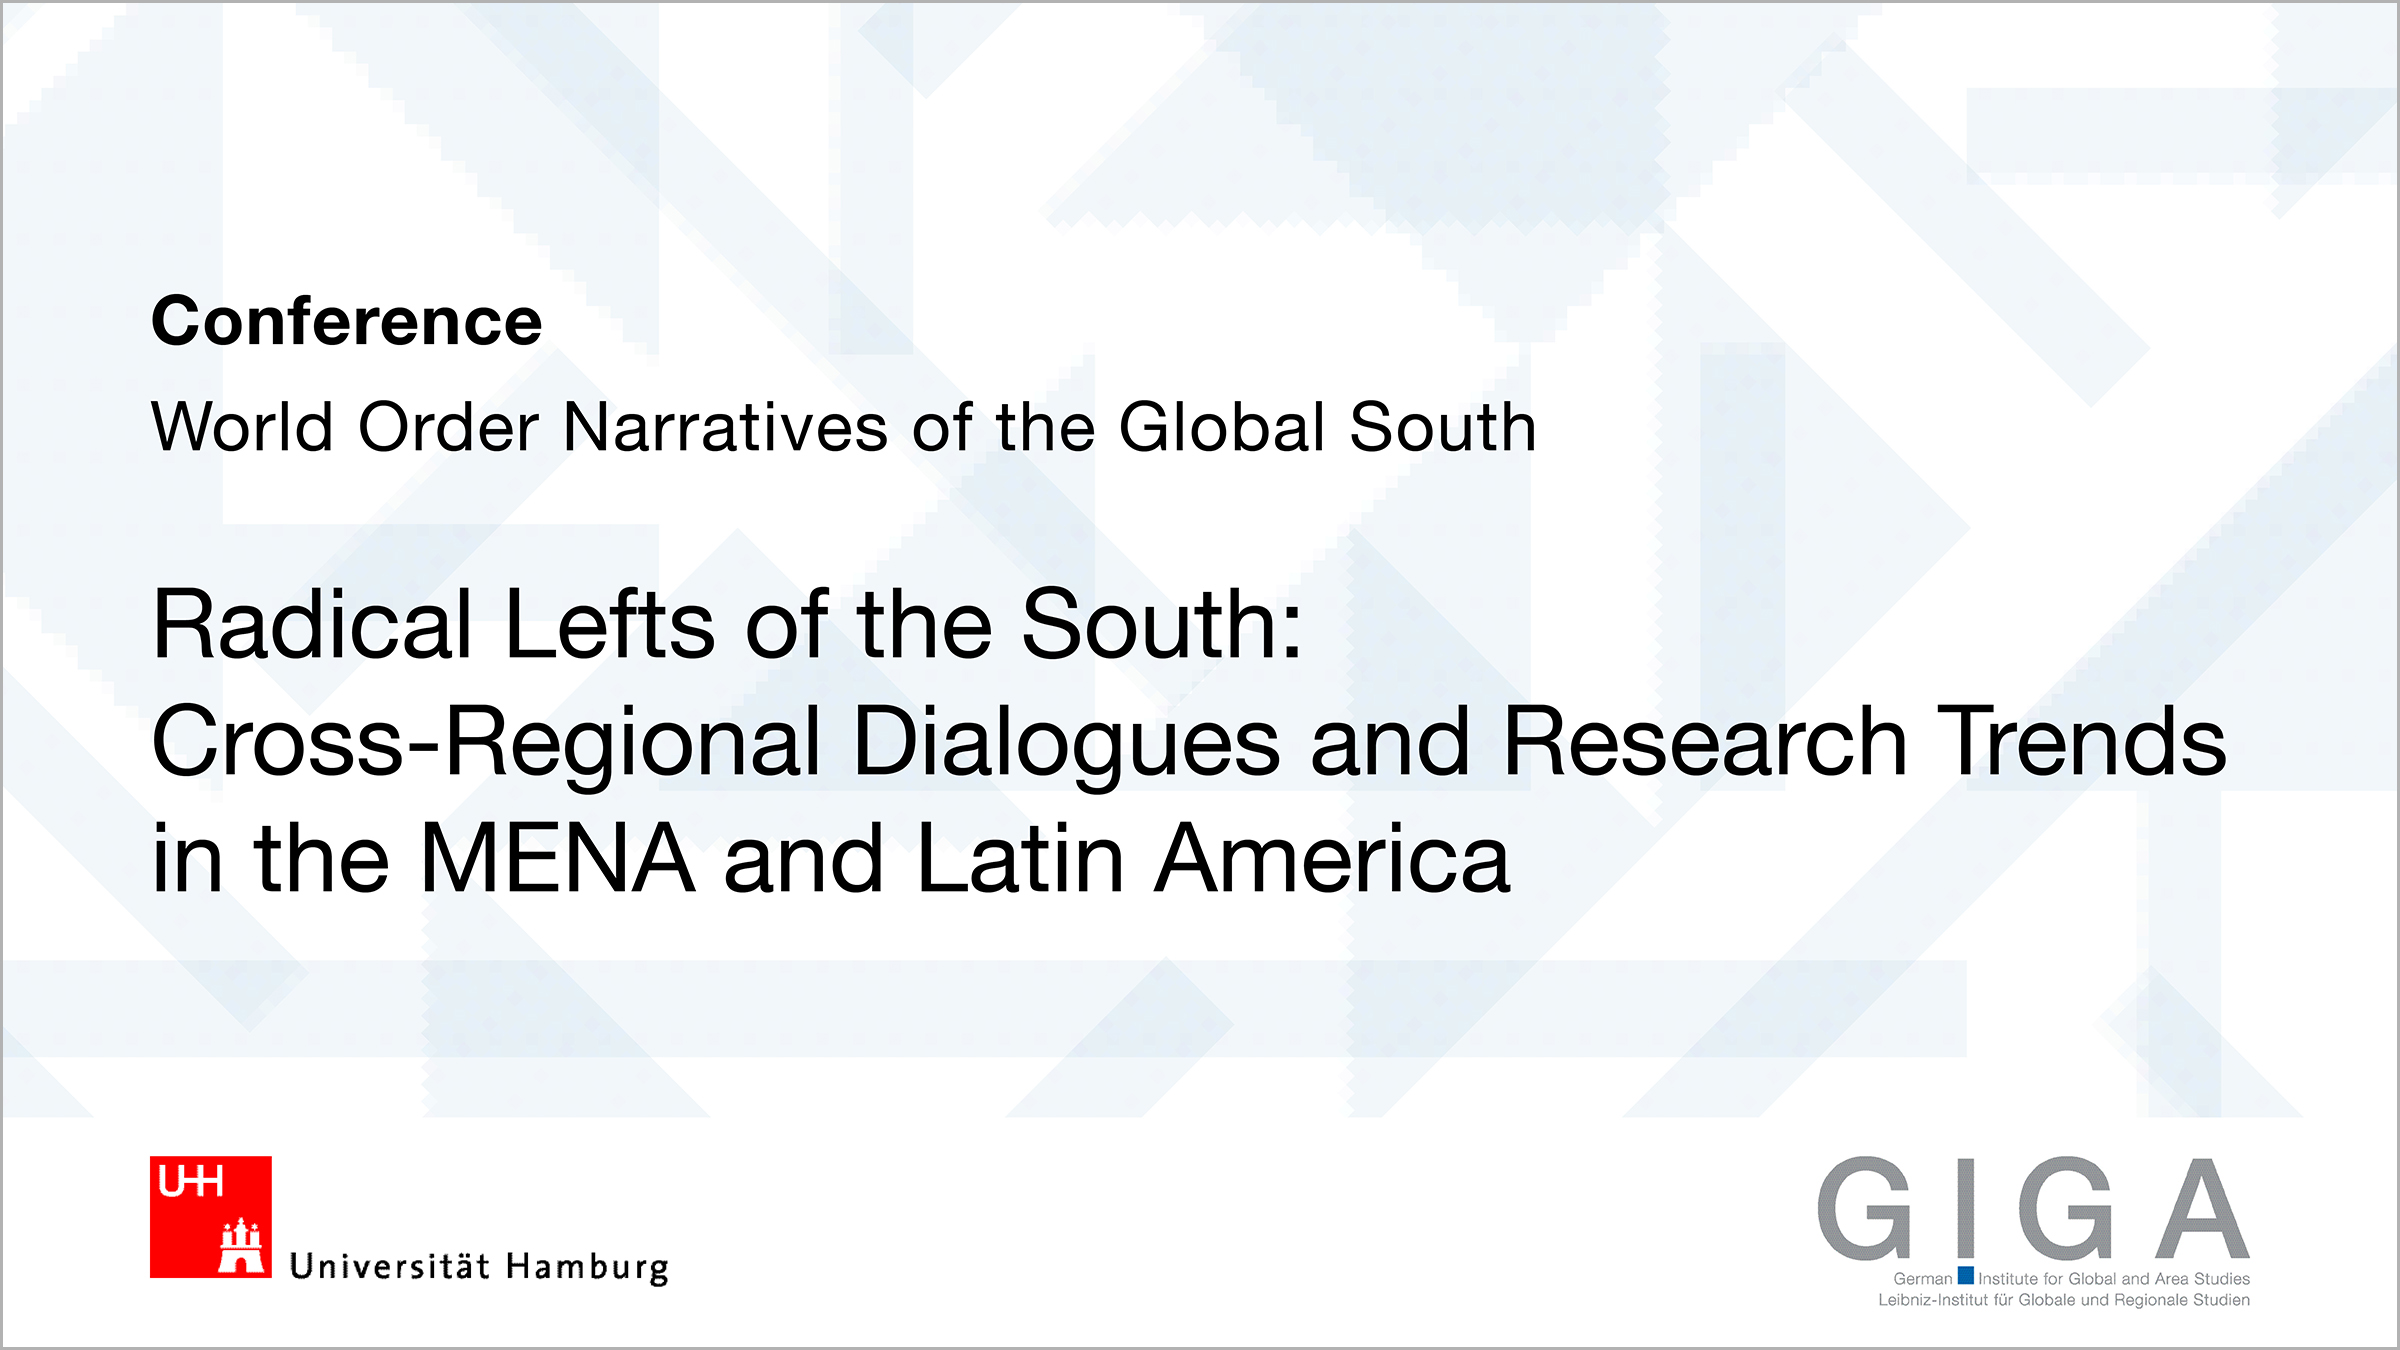 Radical Lefts of the South: Cross-Regional Dialogues and Research Trends in the MENA and Latin America